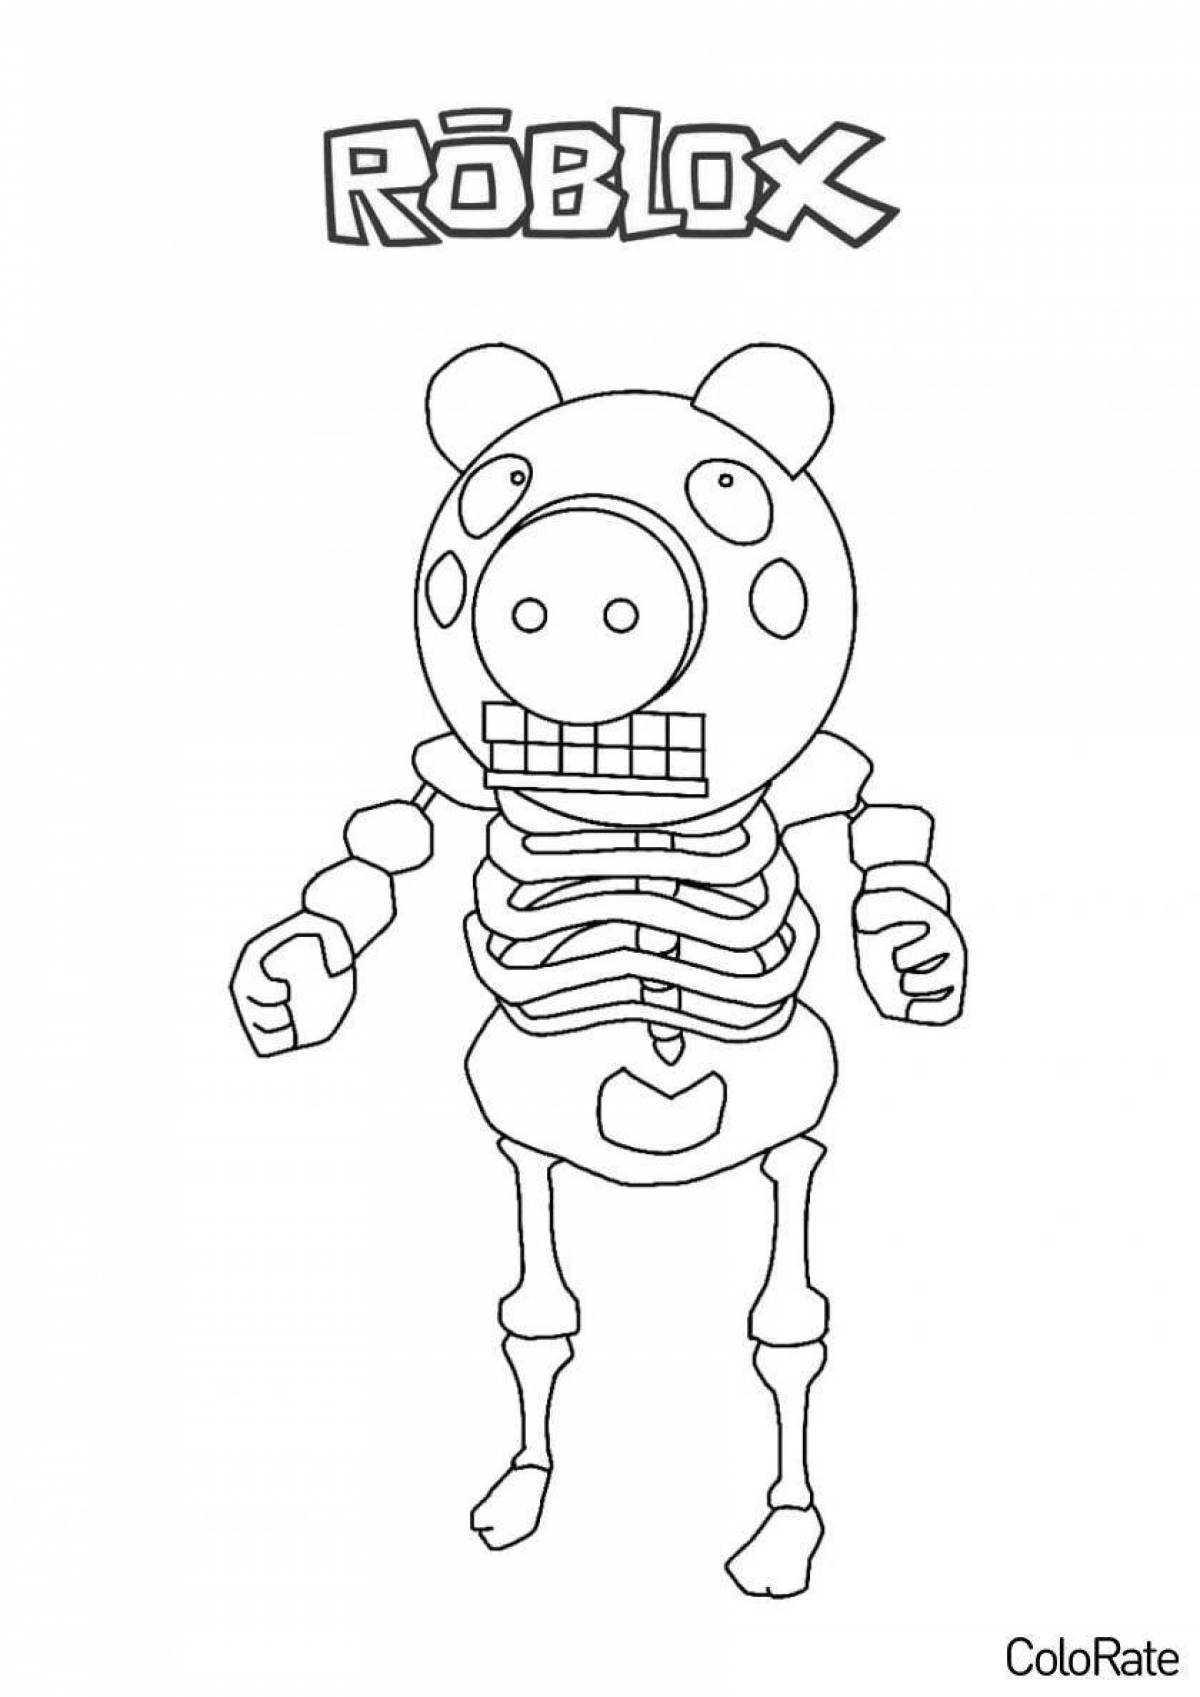 Colorful roblox pig coloring page